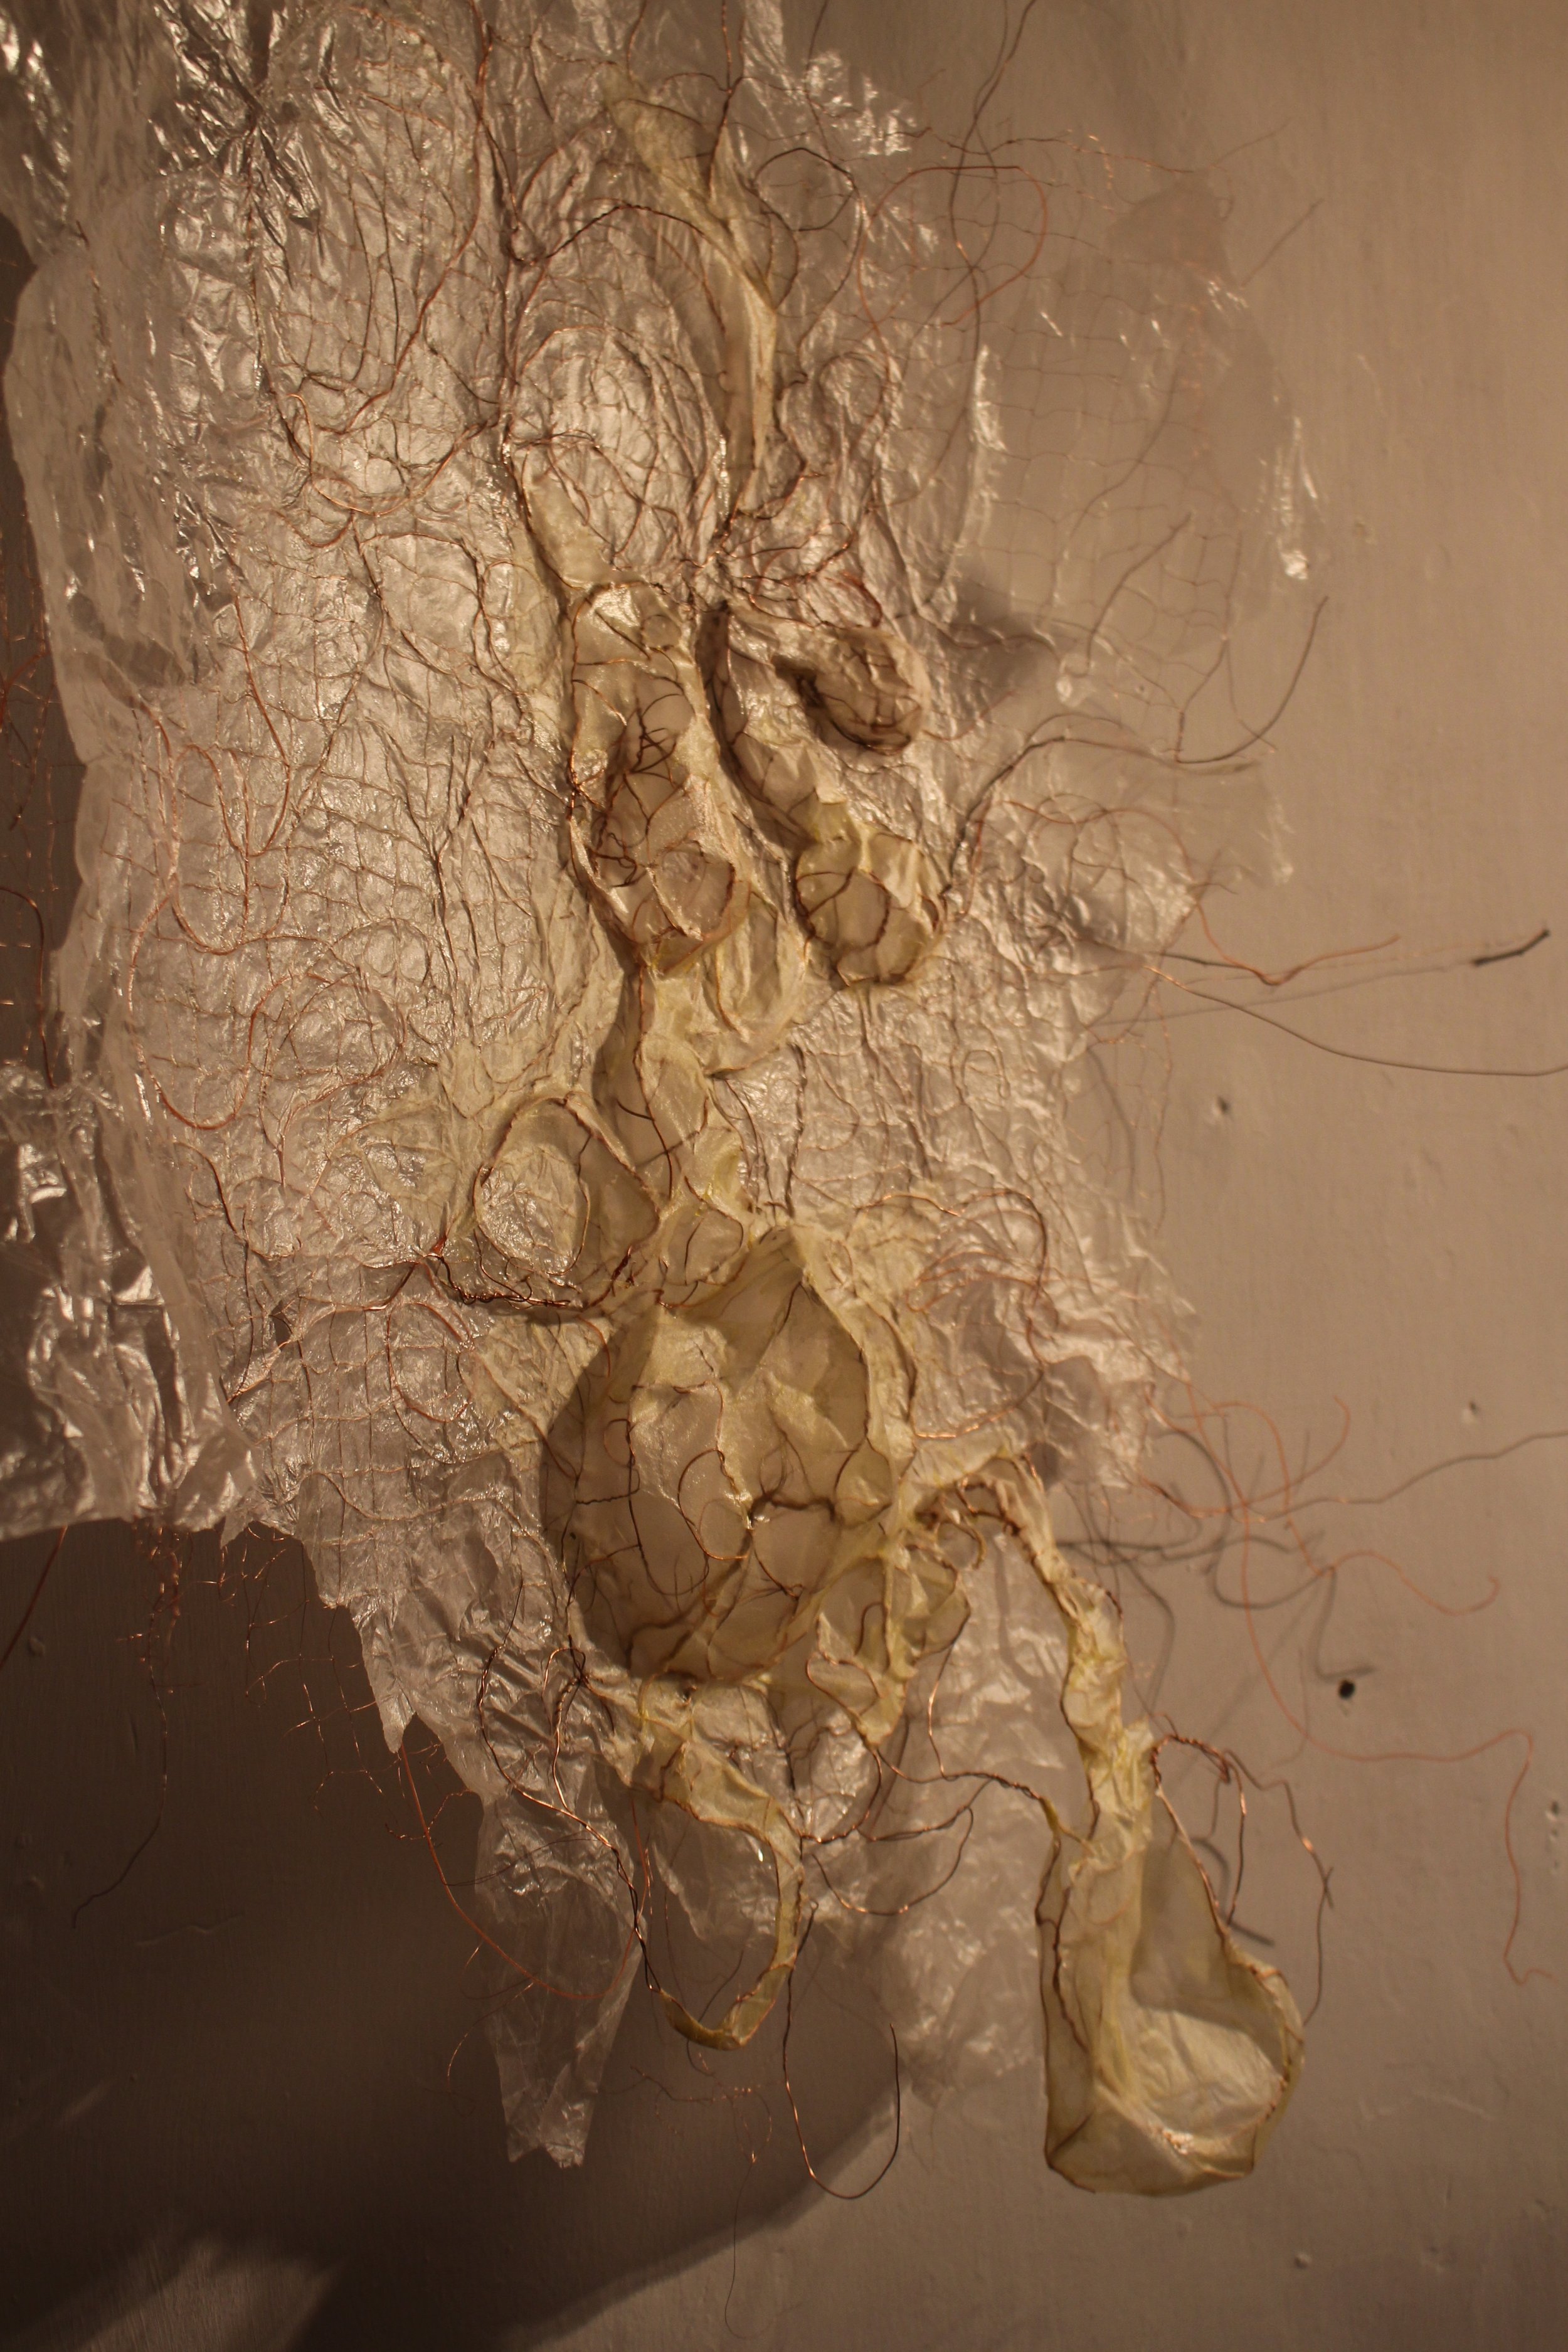 Egg sac inspired drawing/sculpture